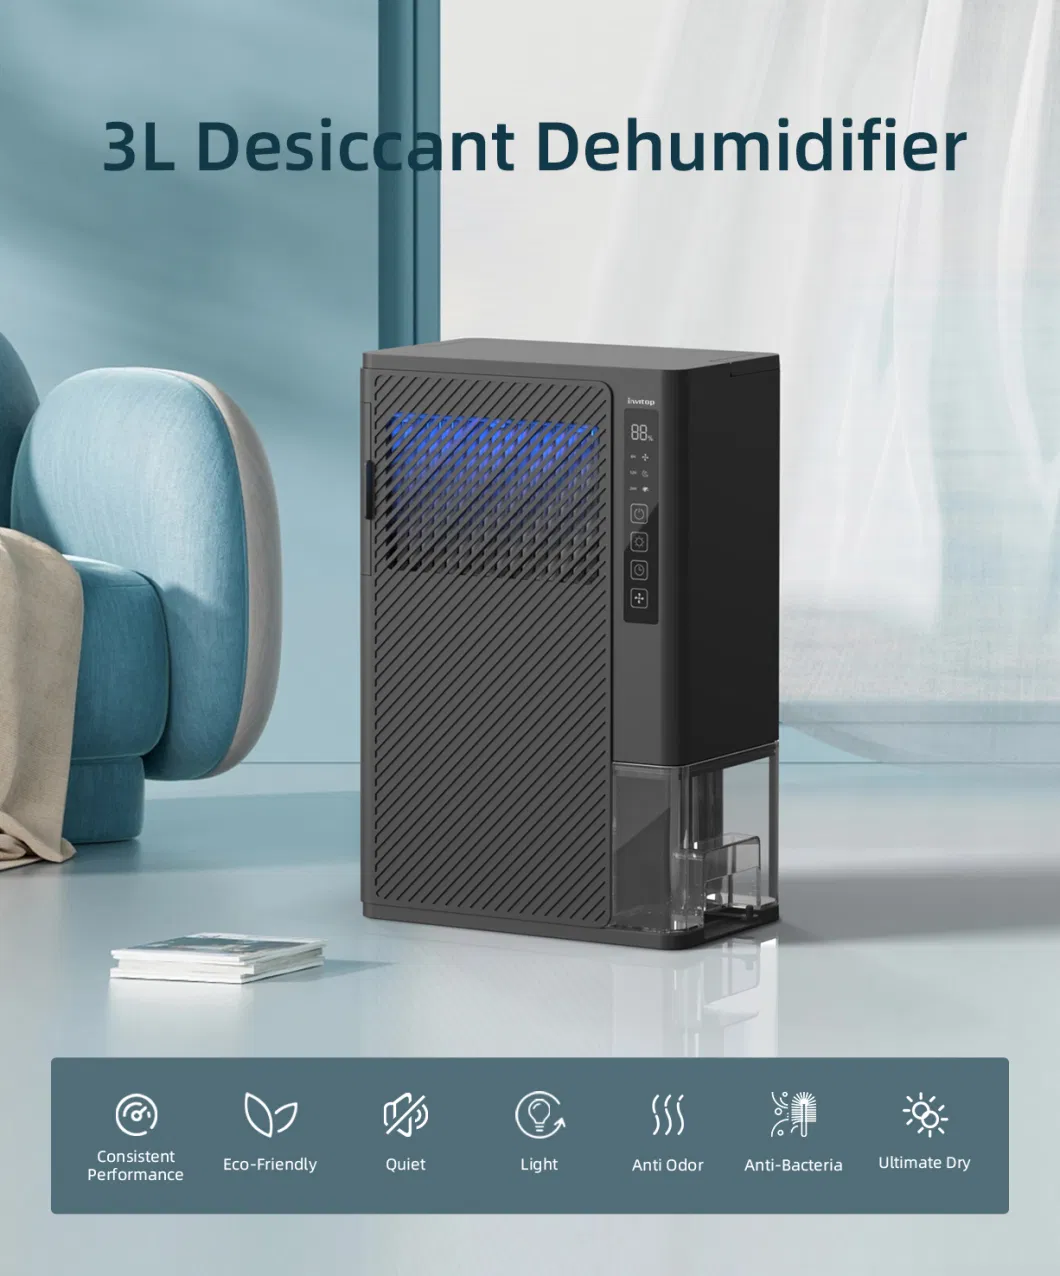 Istsf 50 Dehumidifiers for Plastic Material HEPA13 Compact 150L Device Rotary Dehumidifier